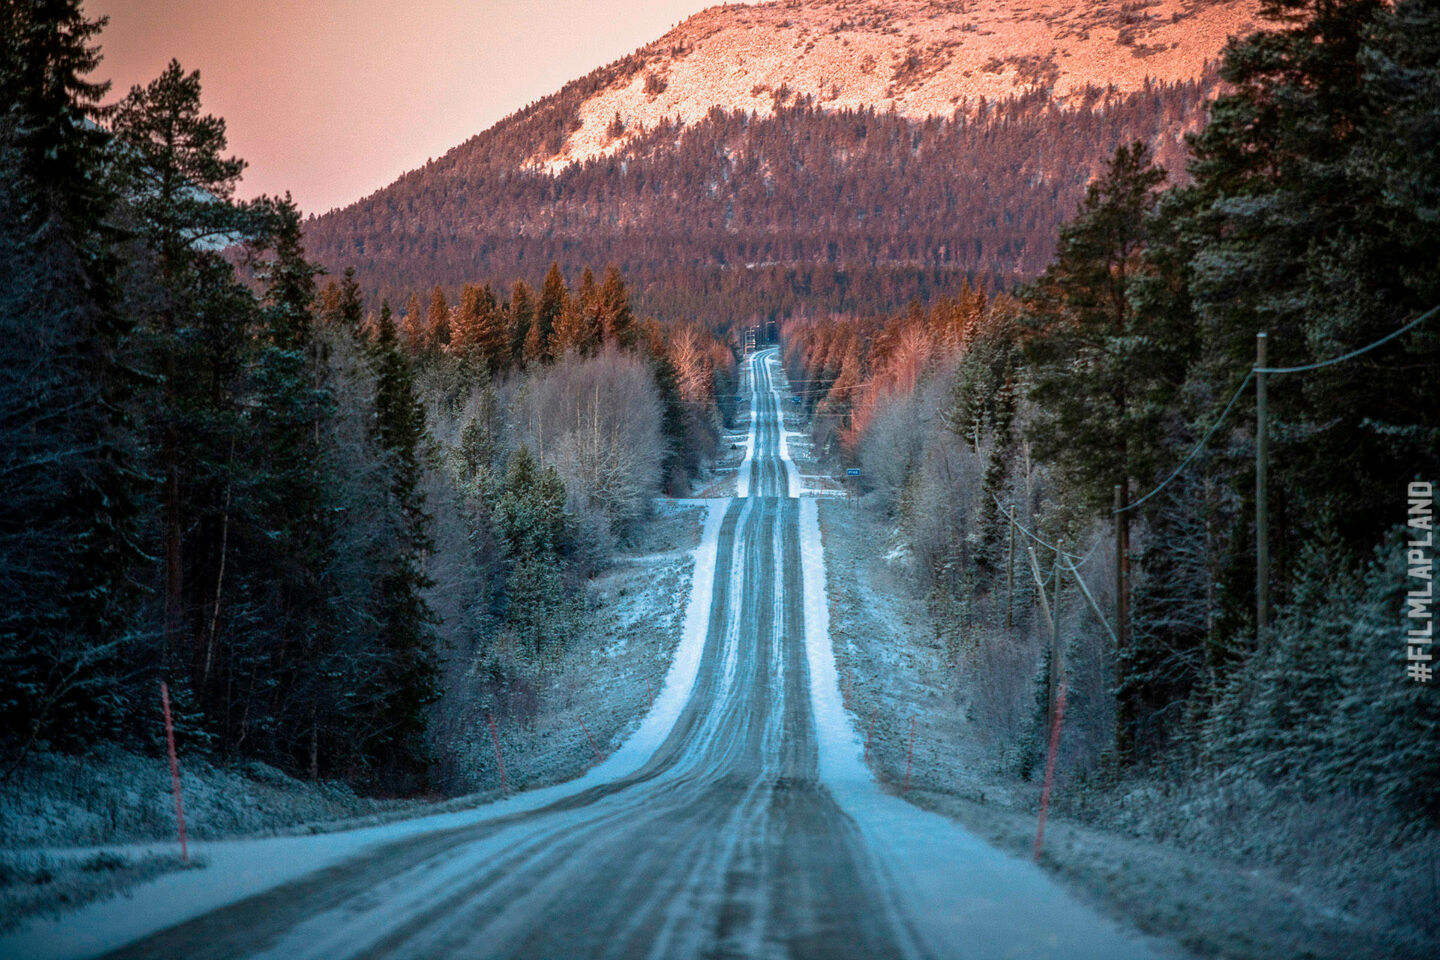 Roads & bridges in Pelkosenniemi, accessible all-winter long, a feature of Finnish Lapland filming locations